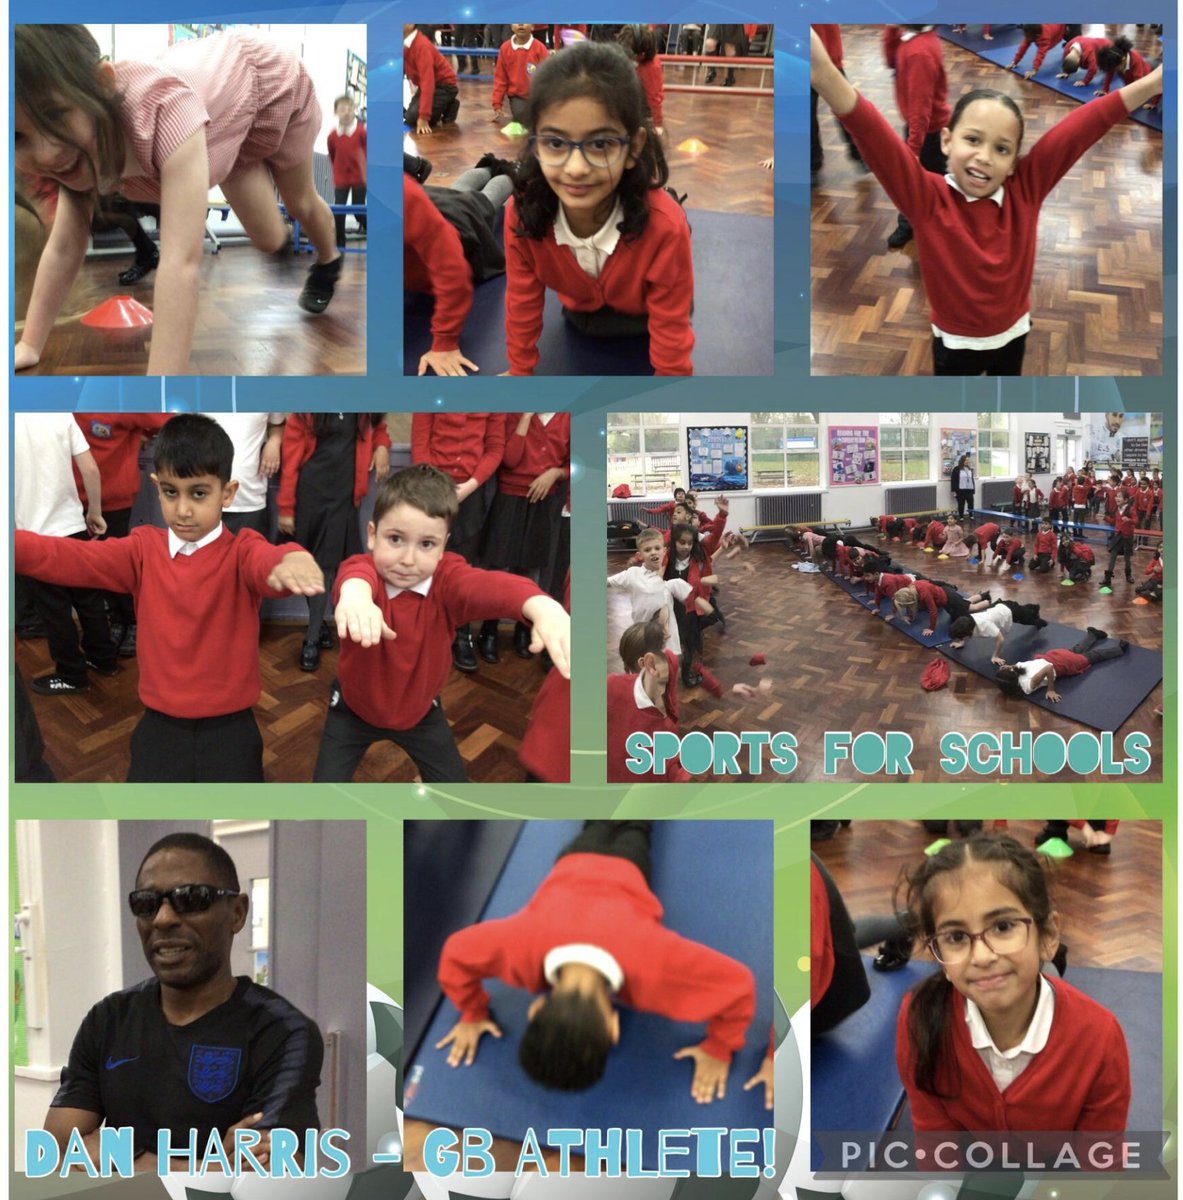 We had a super morning taking part in a sponsored fitness circuit alongside Darren Harris, a top GB Athlete! Thank you to all those who sponsored the children! 🥰 #LFP3KR